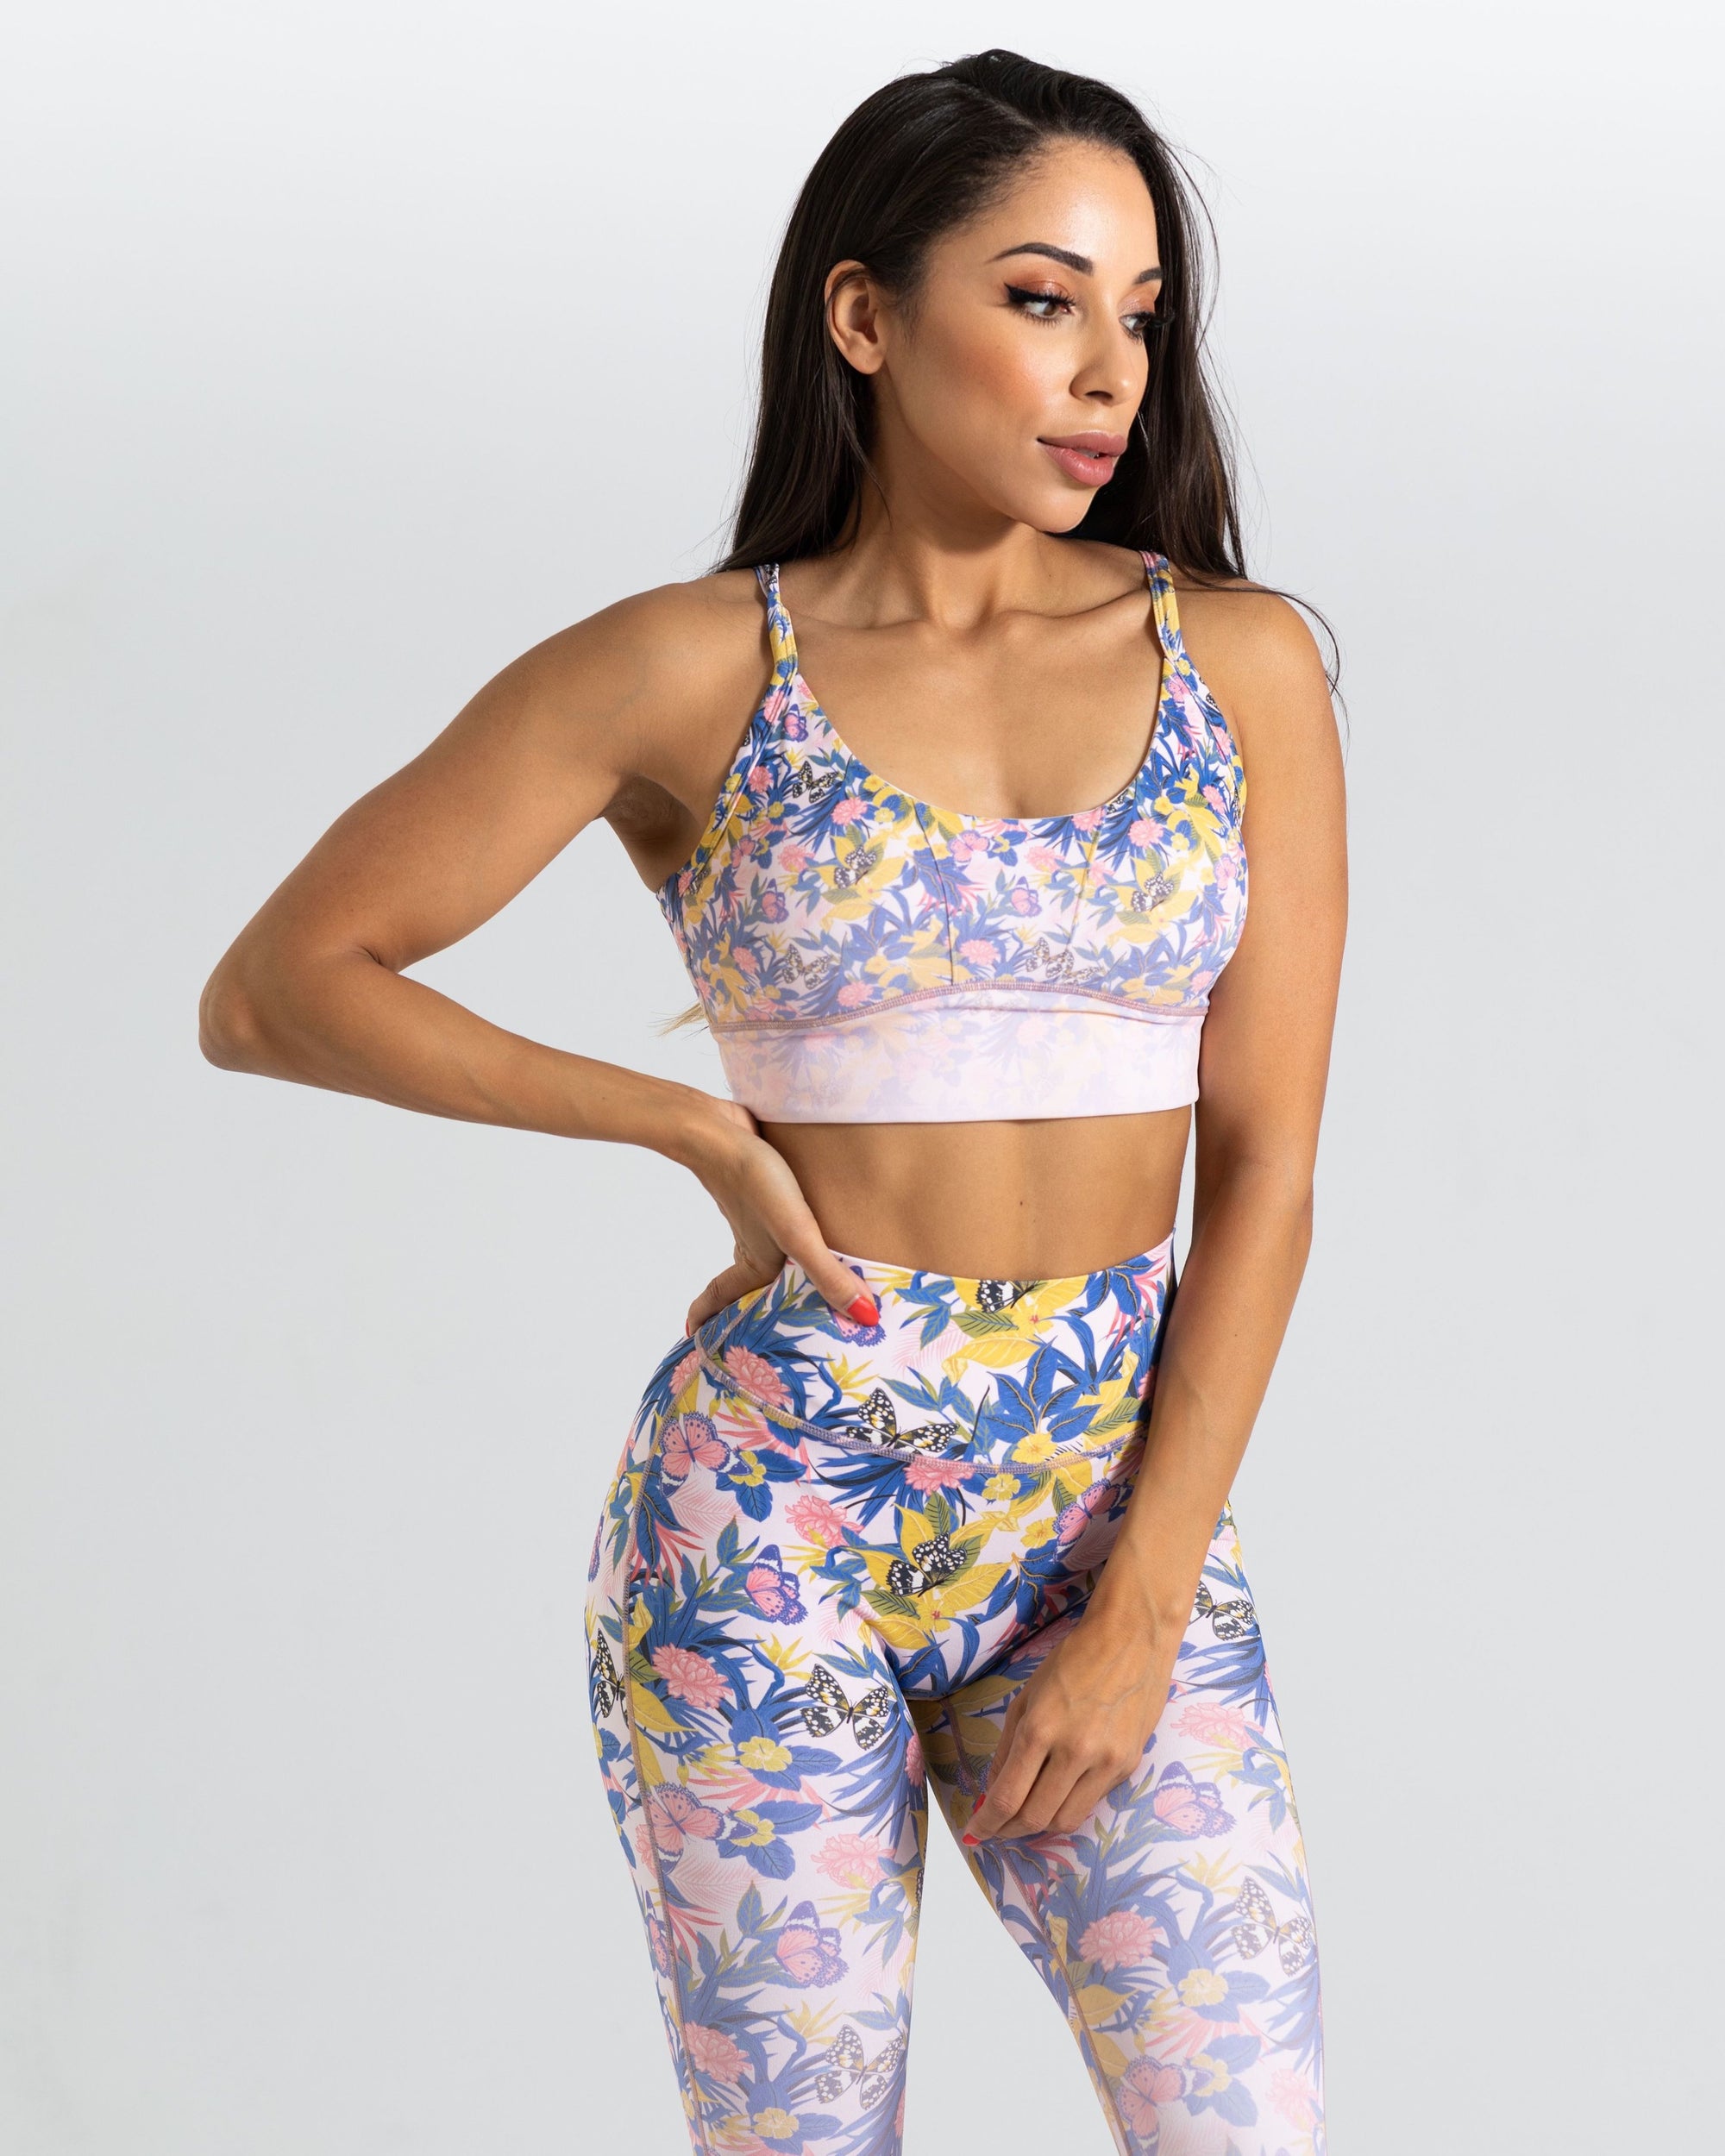 noireblanc, Serafina Collection, Medium support, Double layers sports bra, Floral and butterfly design, Removable pads